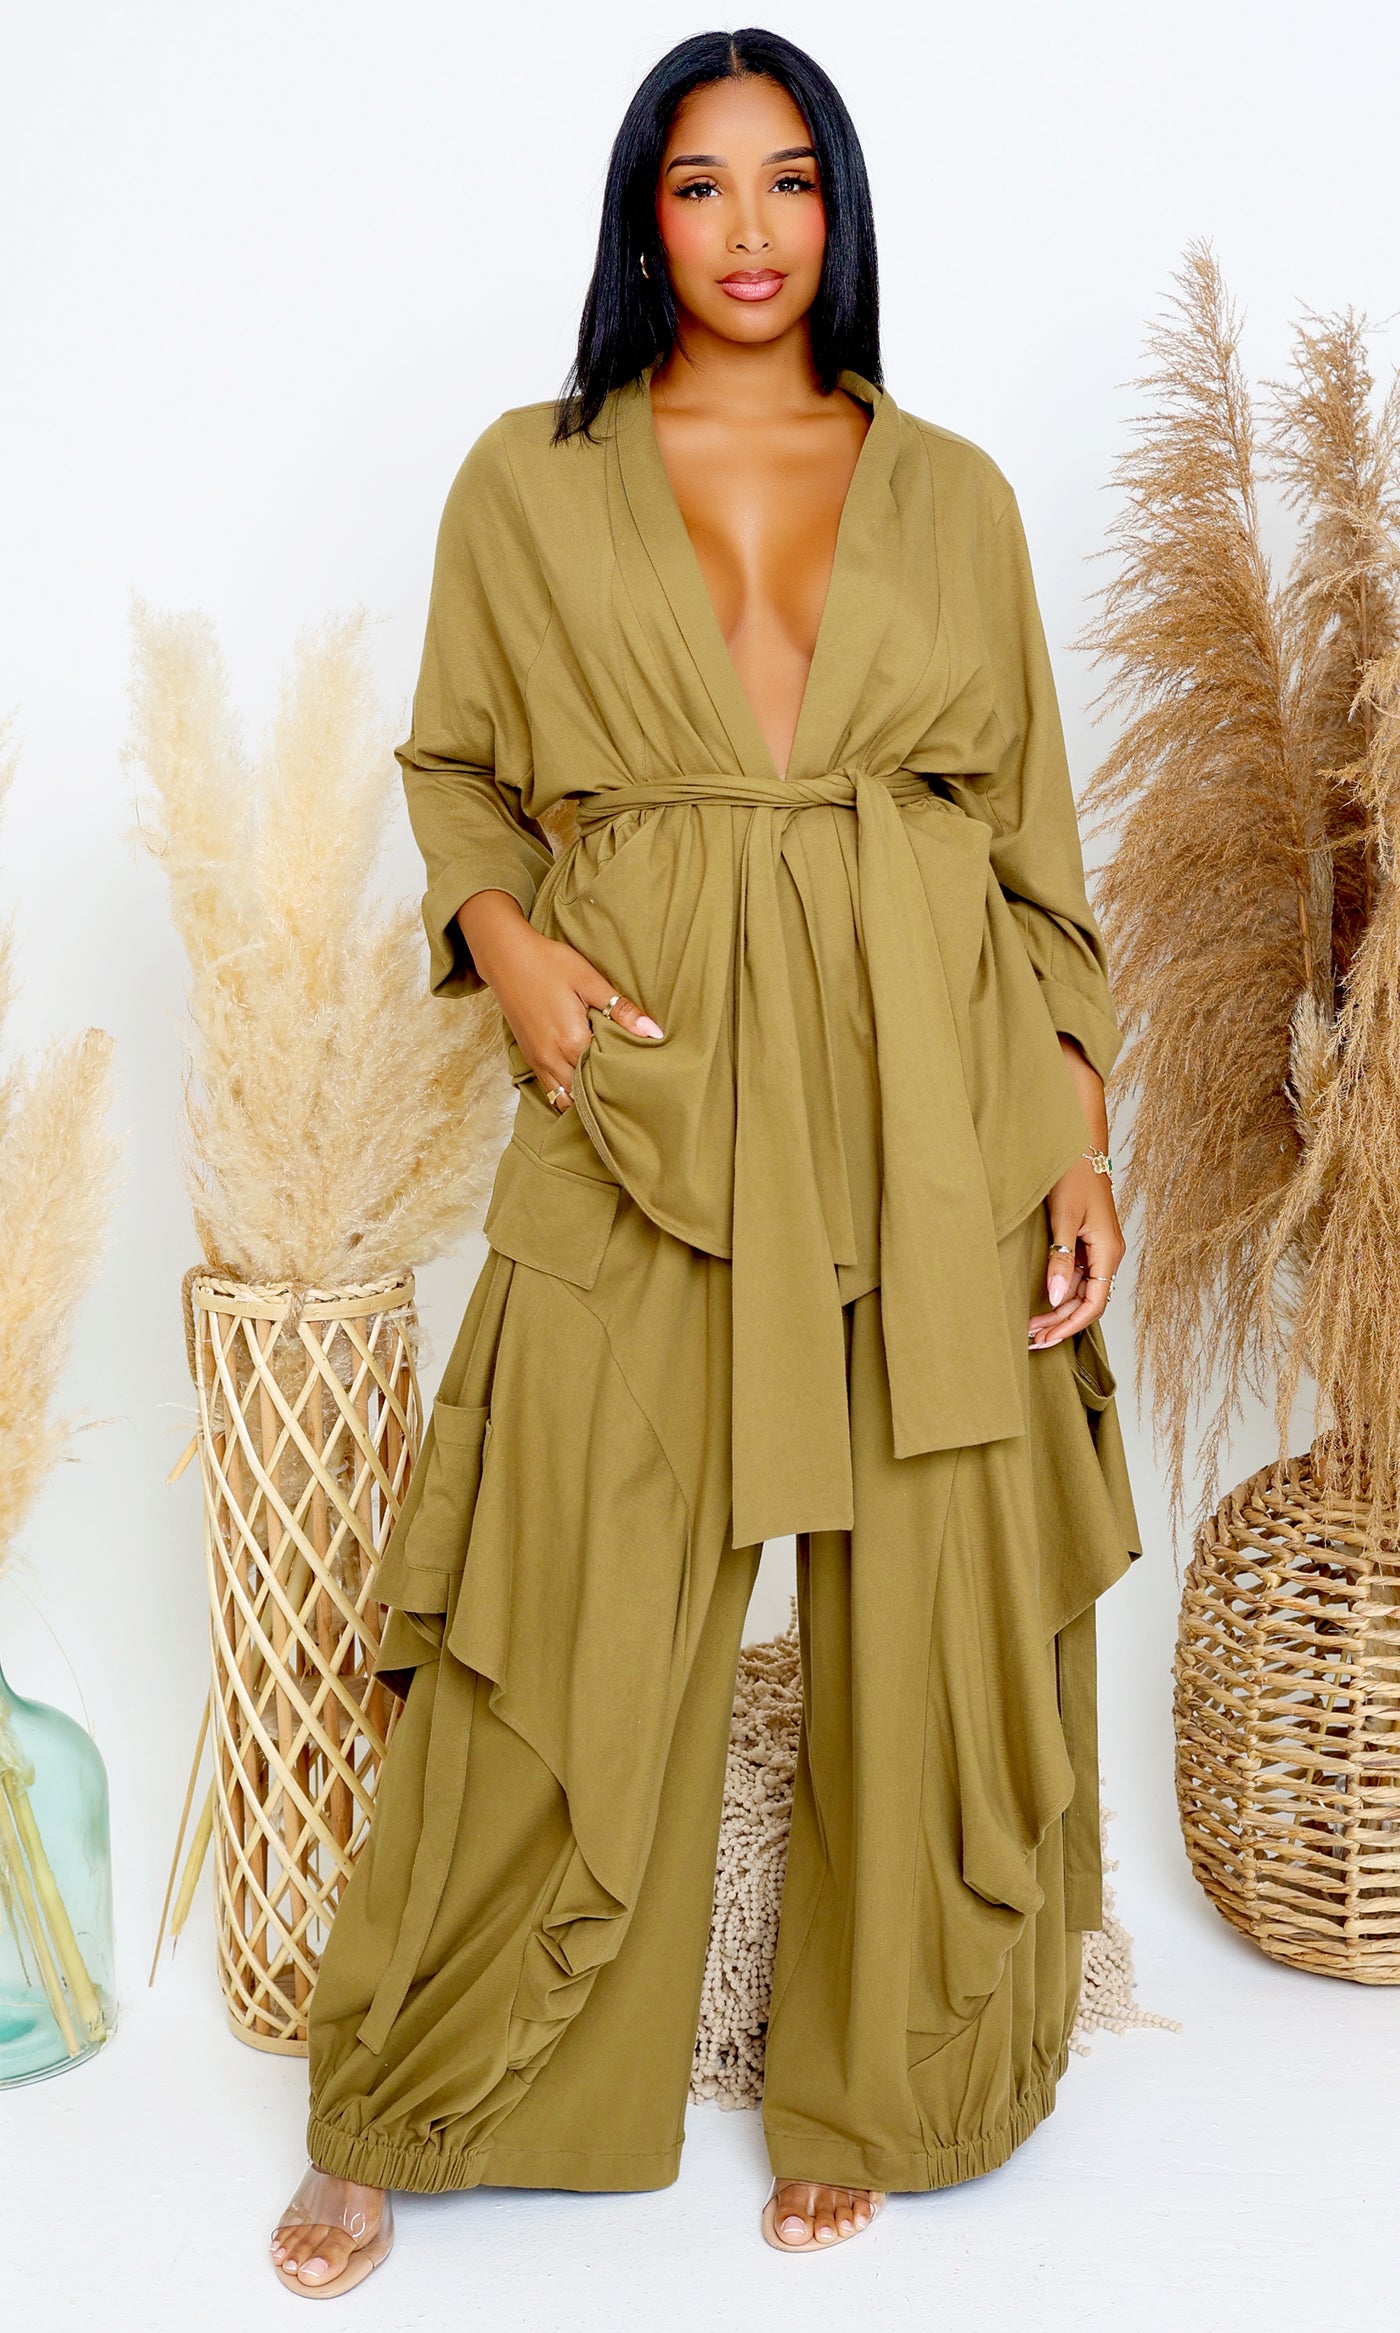 Luxury | Jersey Cardigan Set - Olive PREORDER Ships End August